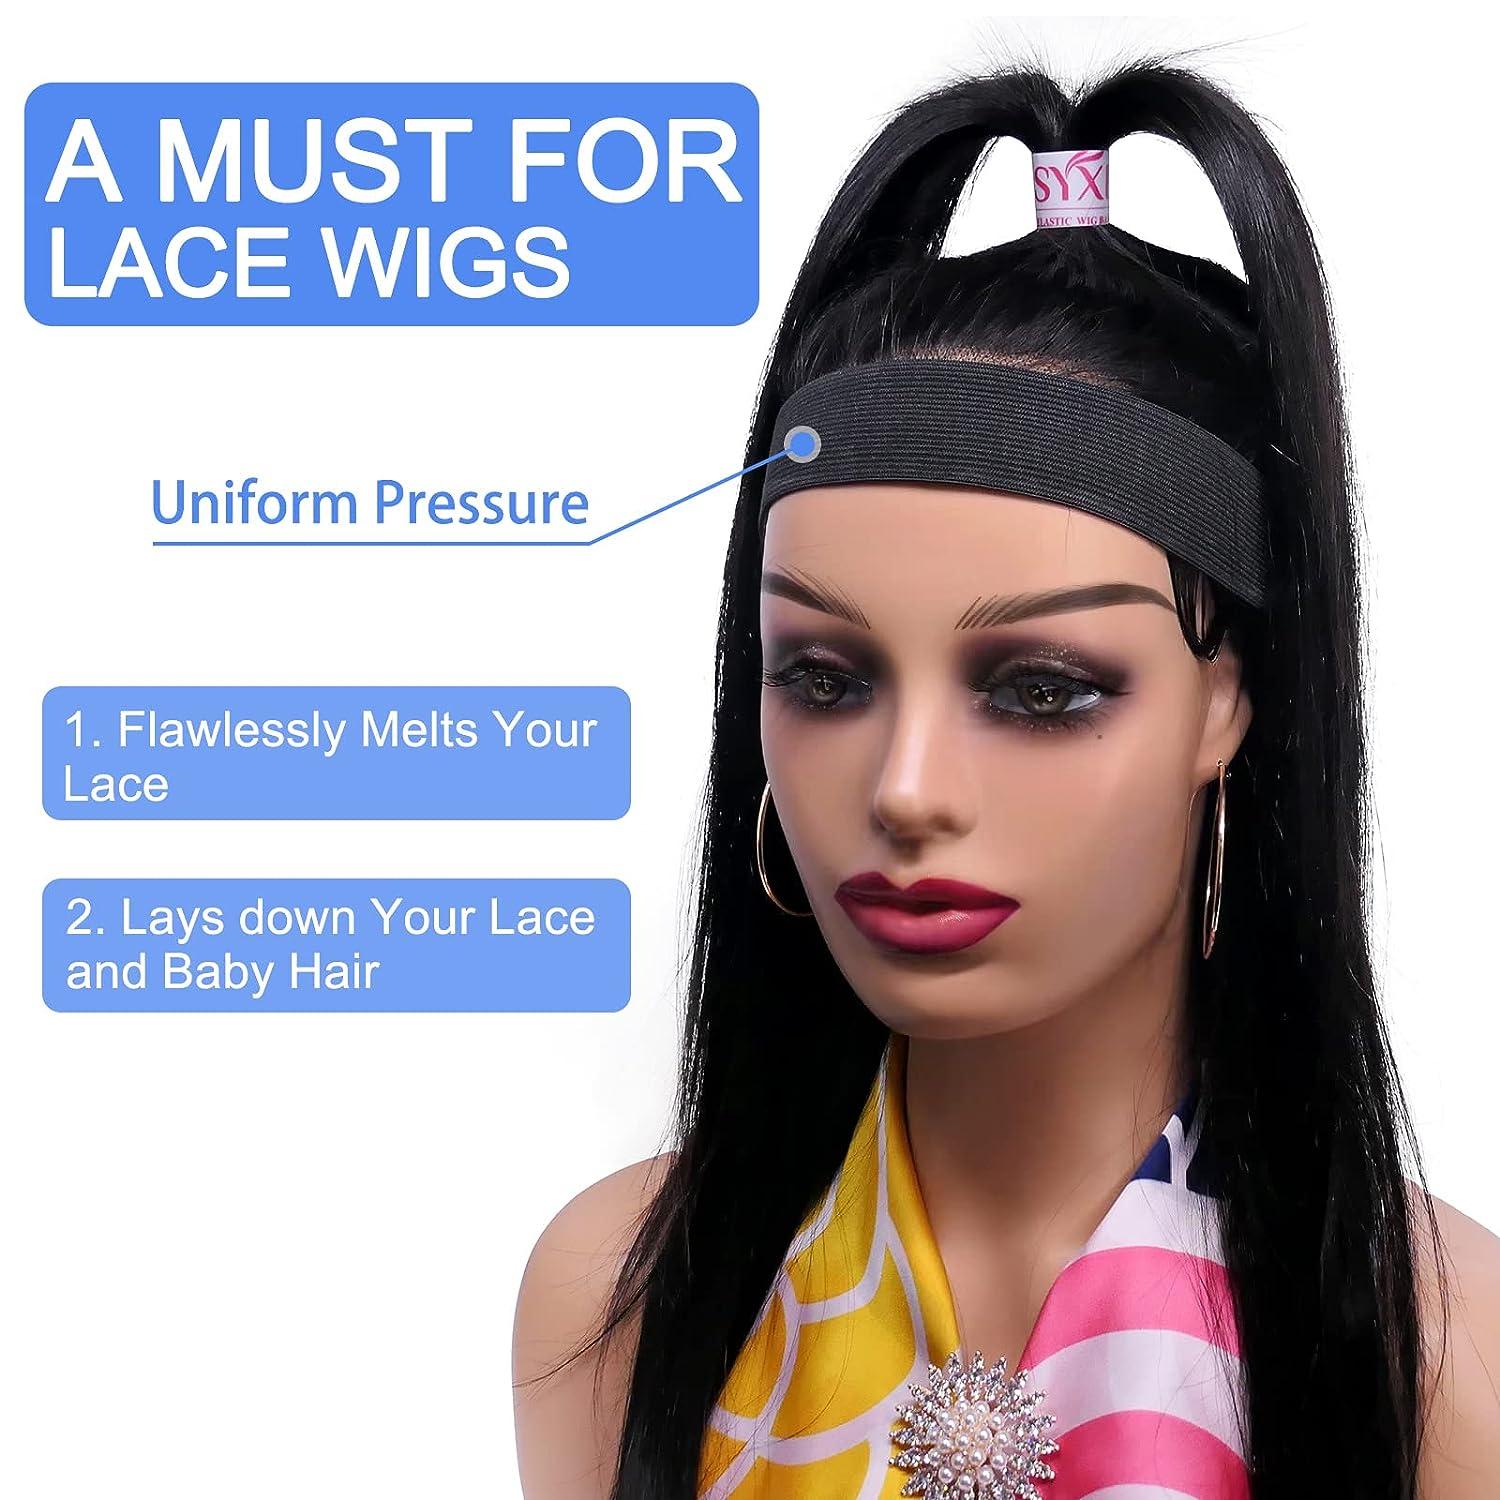  Elastic Bands for Wig,Wig Band For Melting Lace 4PCS Lace  Melting Band,Edge Wrap To Lay Edges,Wig Bands For Keeping Wigs In Place,Wig  bands,Wig Headband Lace band,Wig Accessories Edge Laying Band 